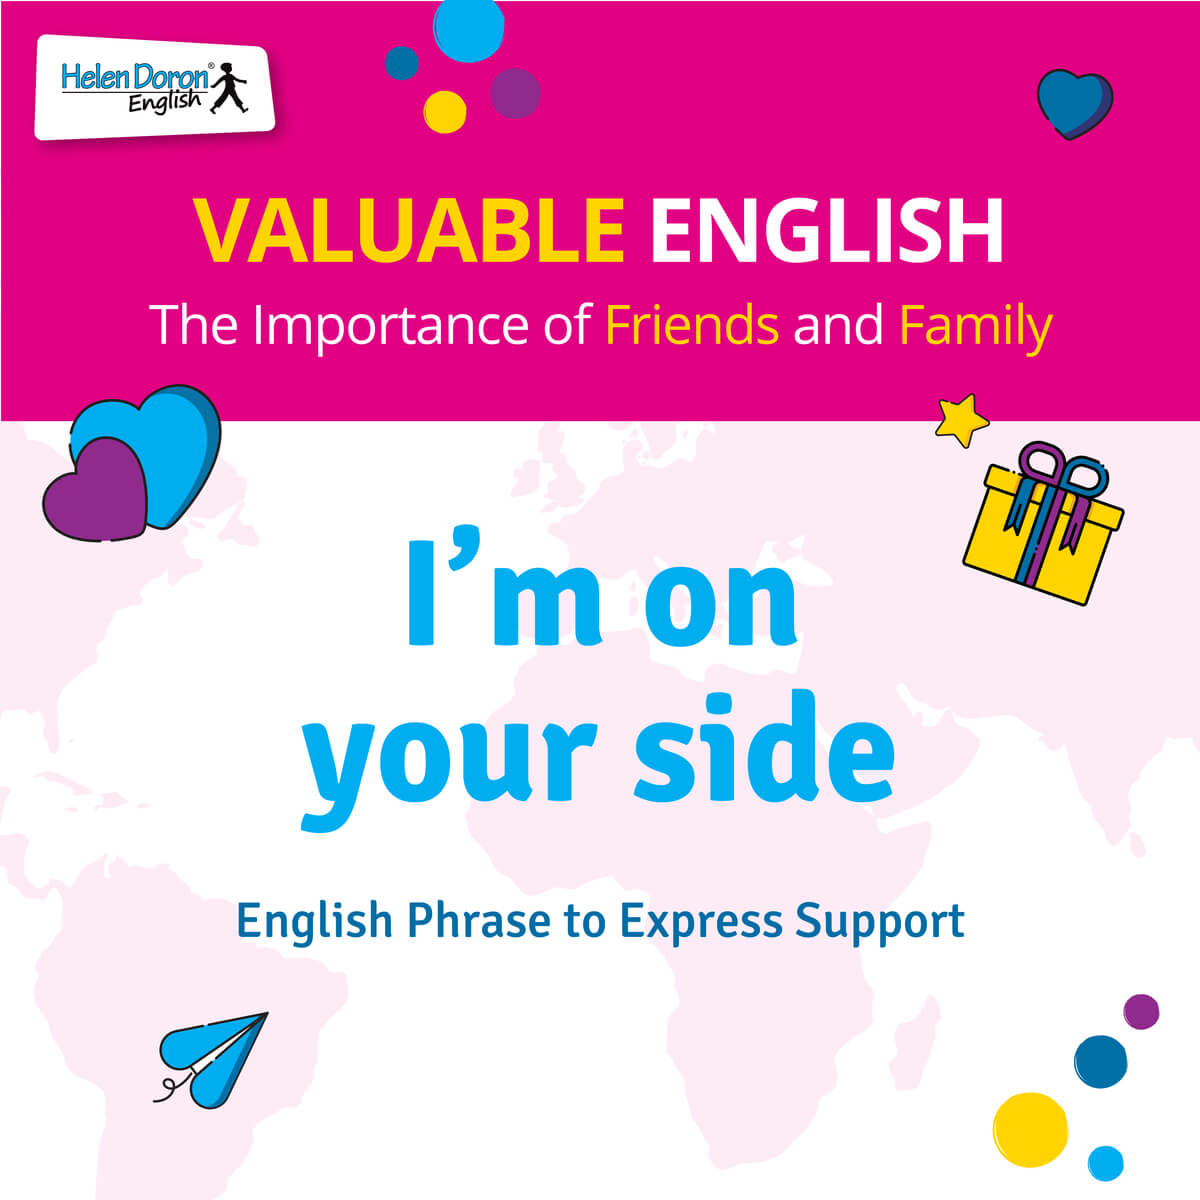 On your side - English phrase express support